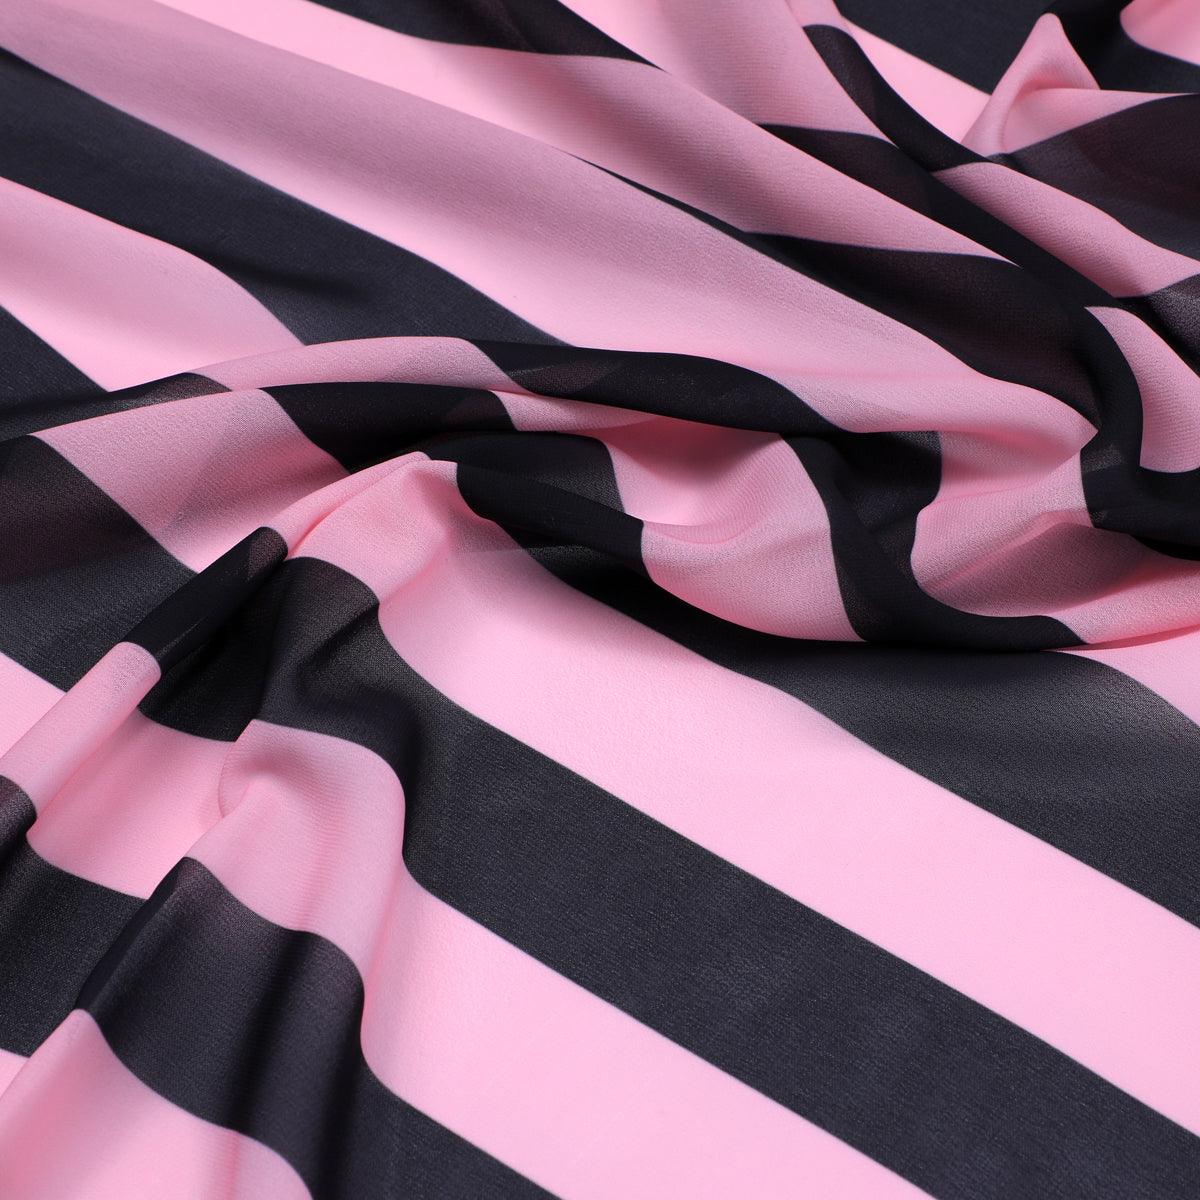 Bayadere Stripes Black With Pink Digital Printed Fabric - Weightless - FAB VOGUE Studio®